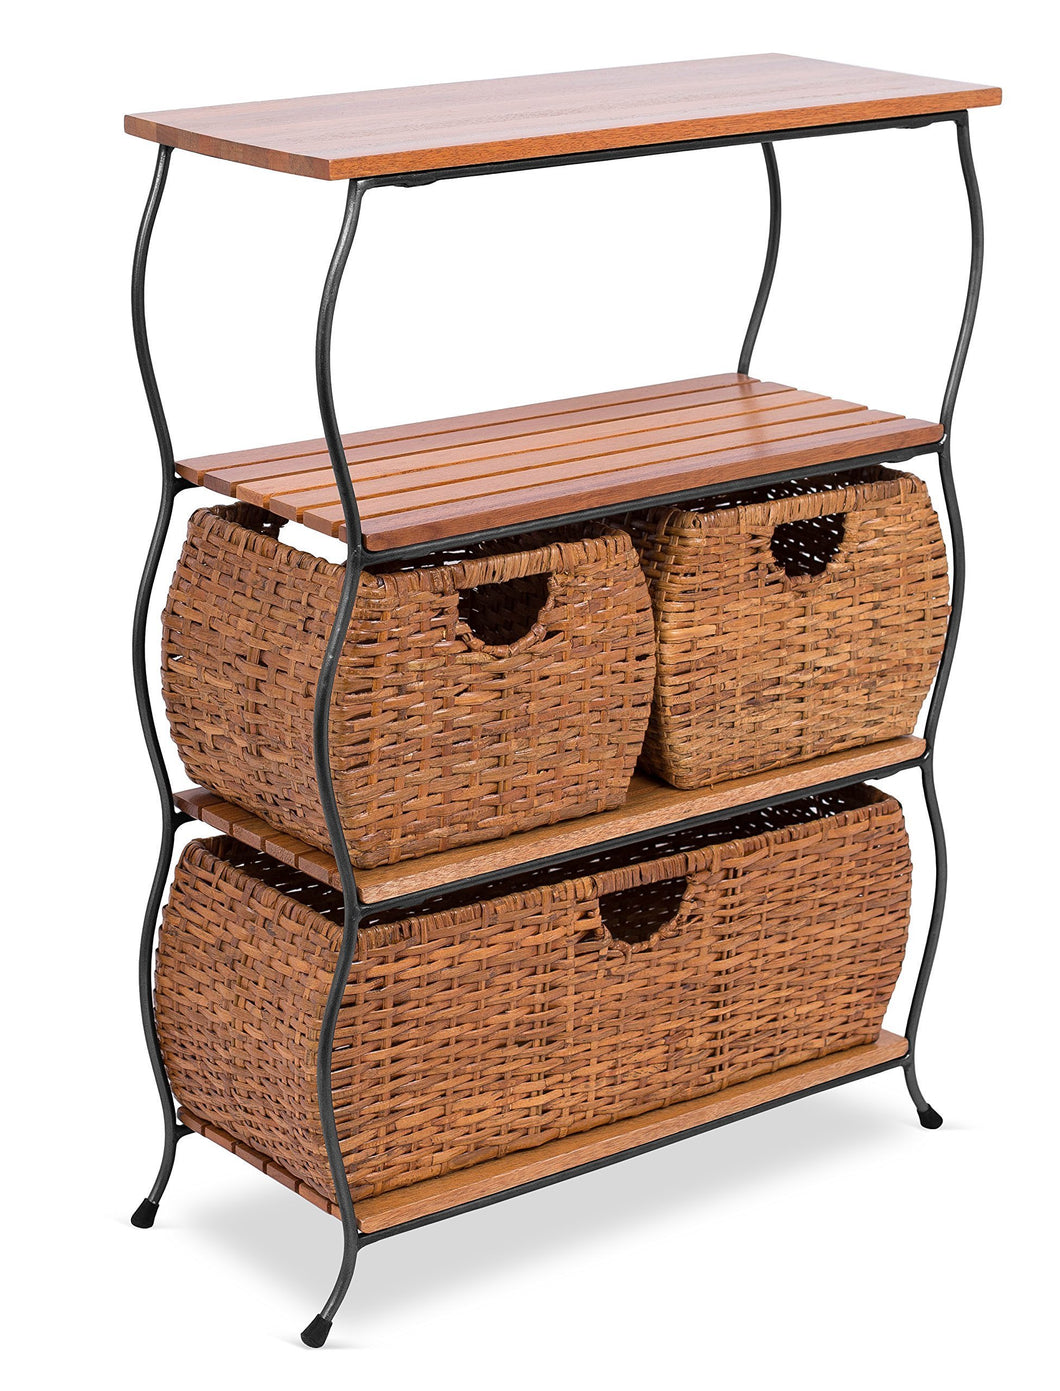 BIRDROCK HOME Industrial 4-Tier Shelving Unit with Rattan Woven Baskets - Delivered Fully Assembled - Wooden Freestanding Shelves with Storage Bins - Decorative Living Room Shelf